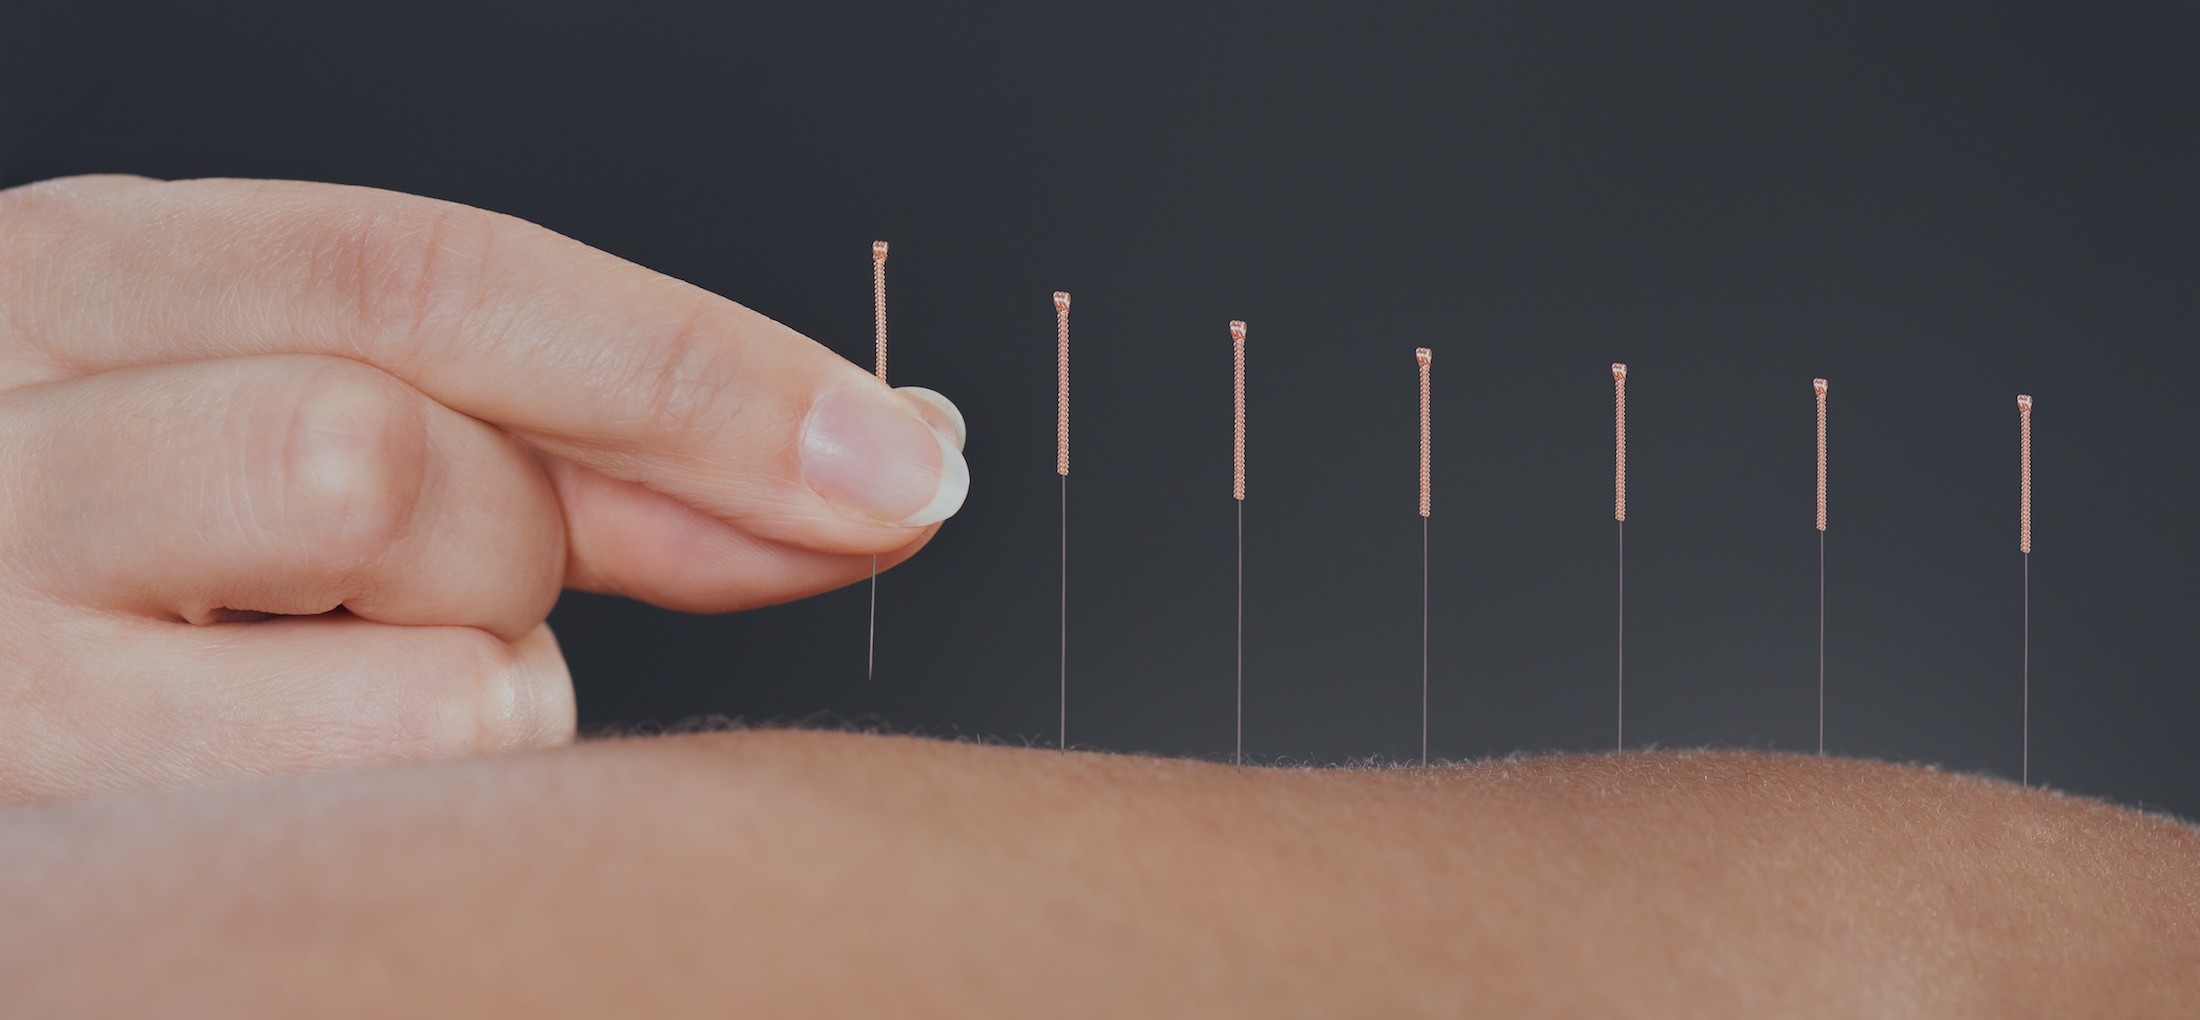 Acupuncture needles being inserted into a person's back